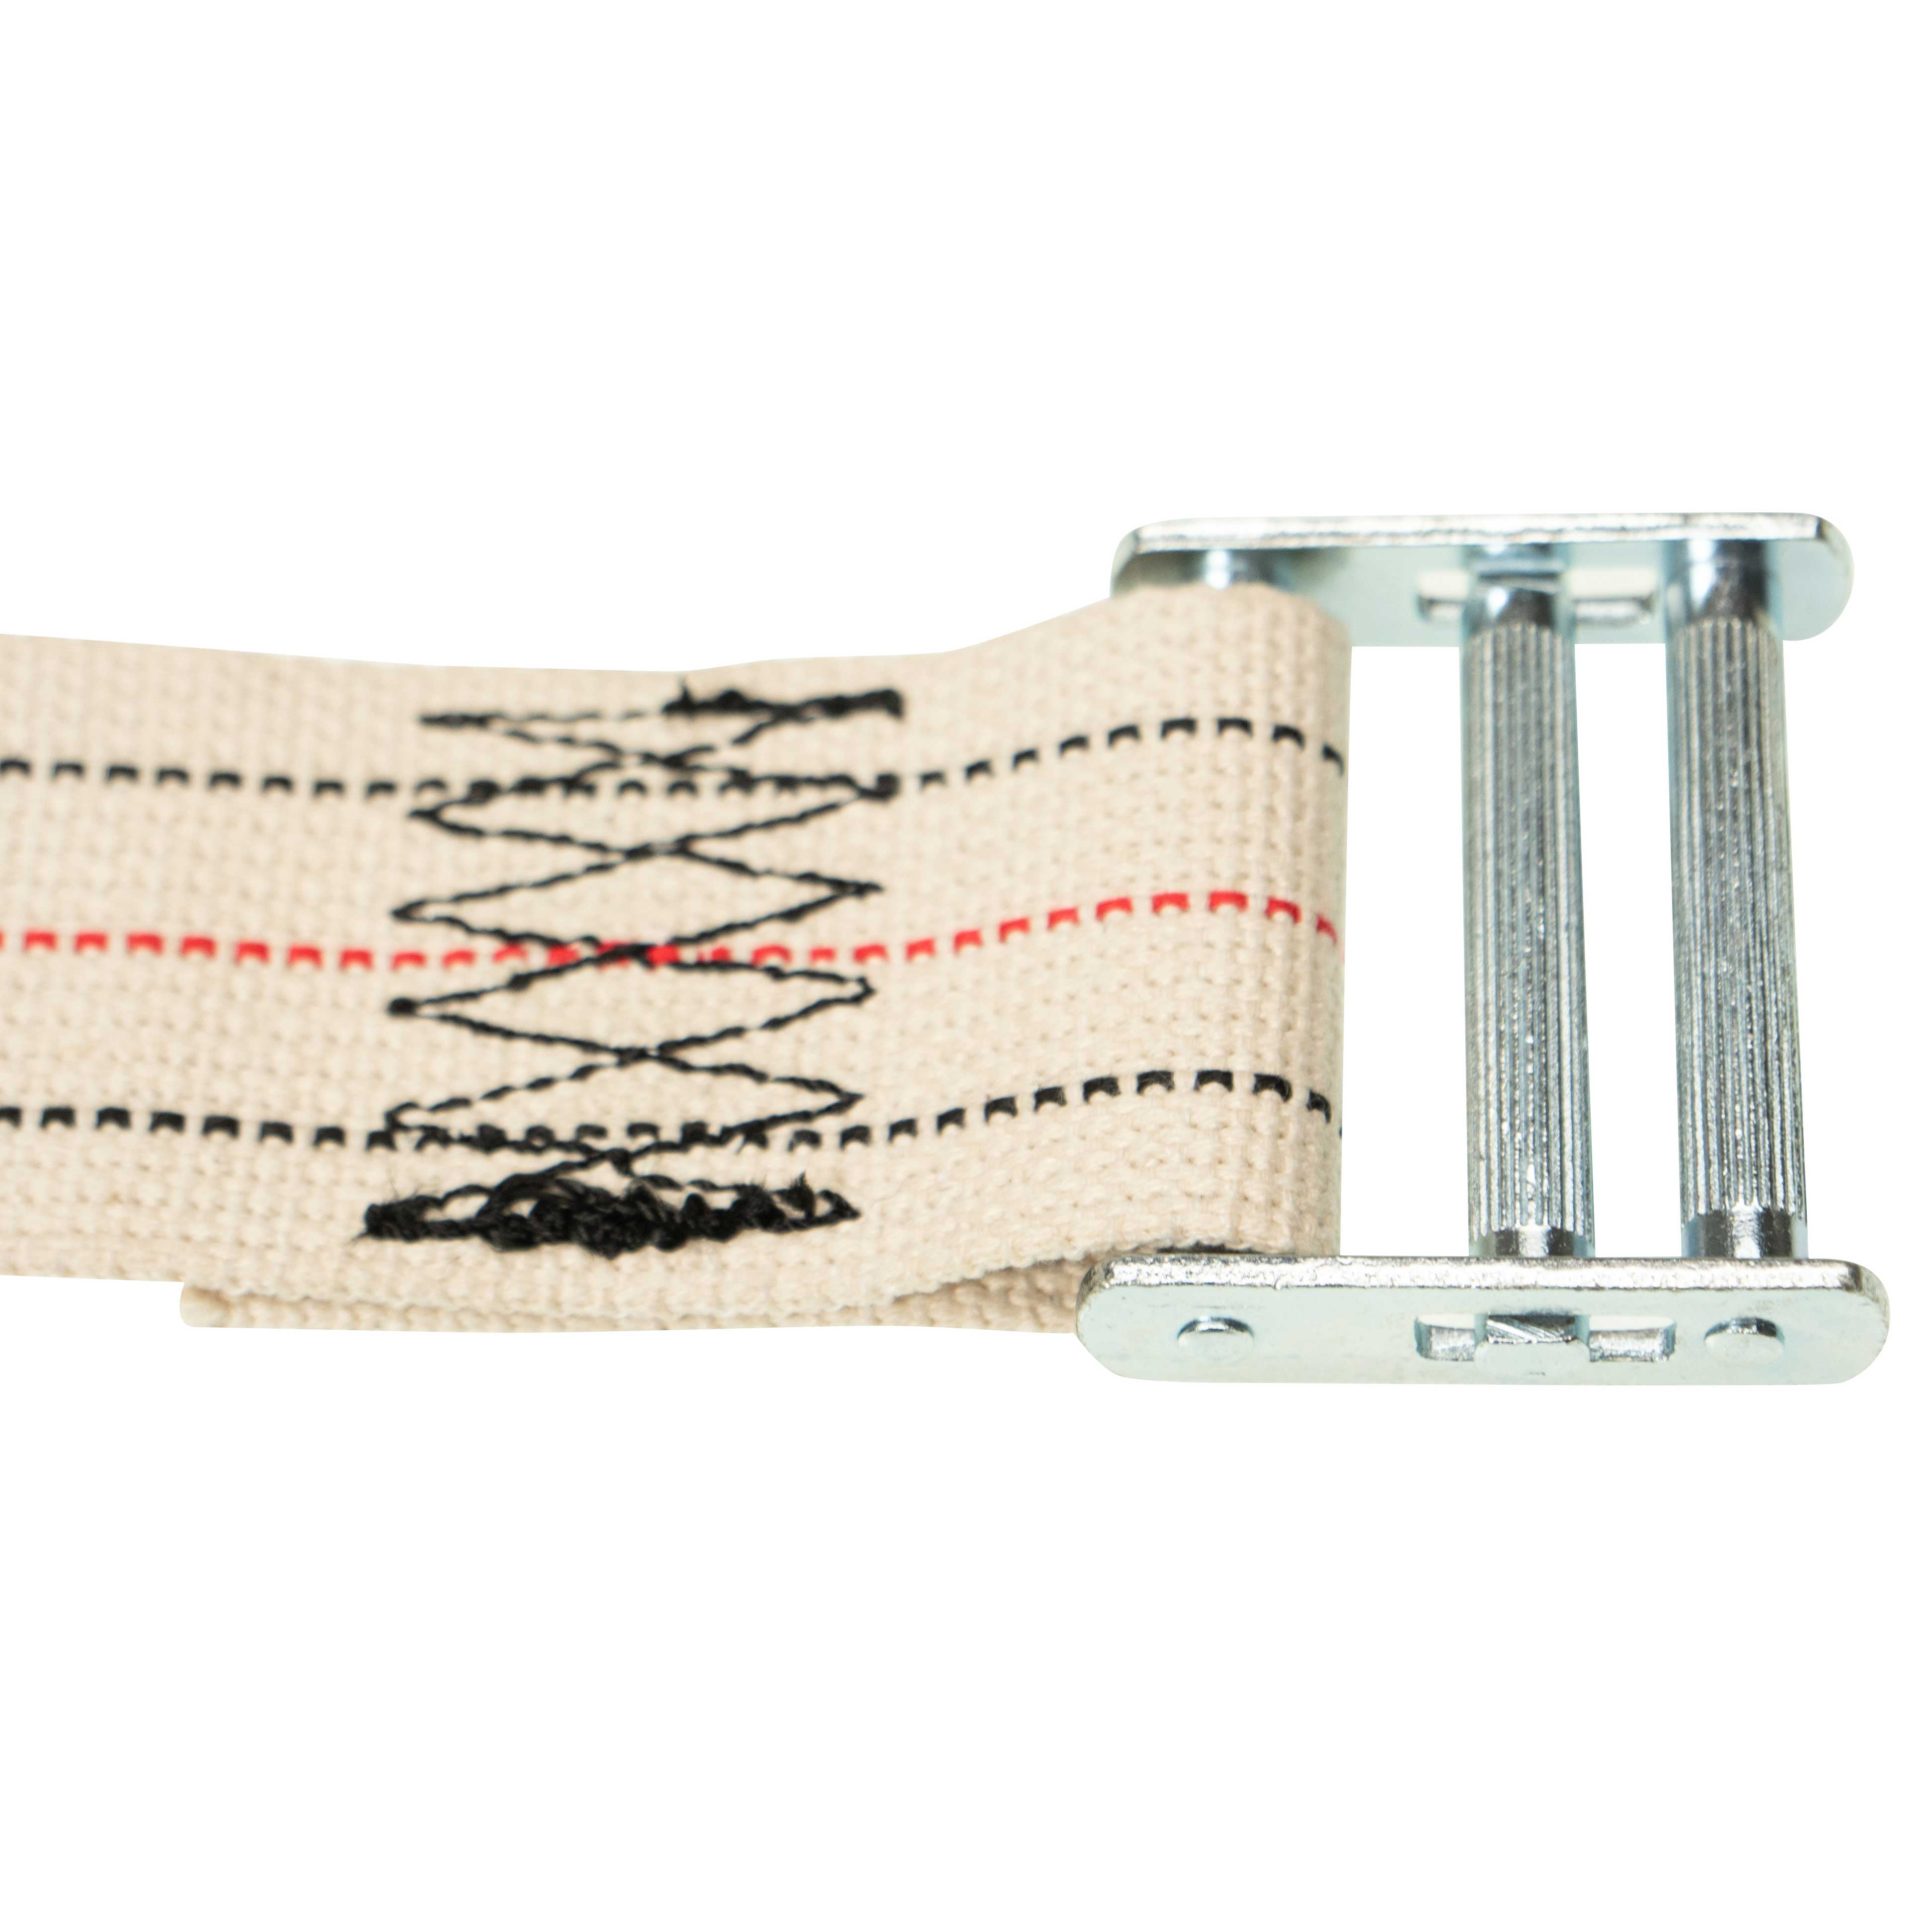 US Cargo Control Piano Moving Strap 2 Inch Wide By 15 Feet Long Made From Cotton Webbing With A Slide Roller Buckle 